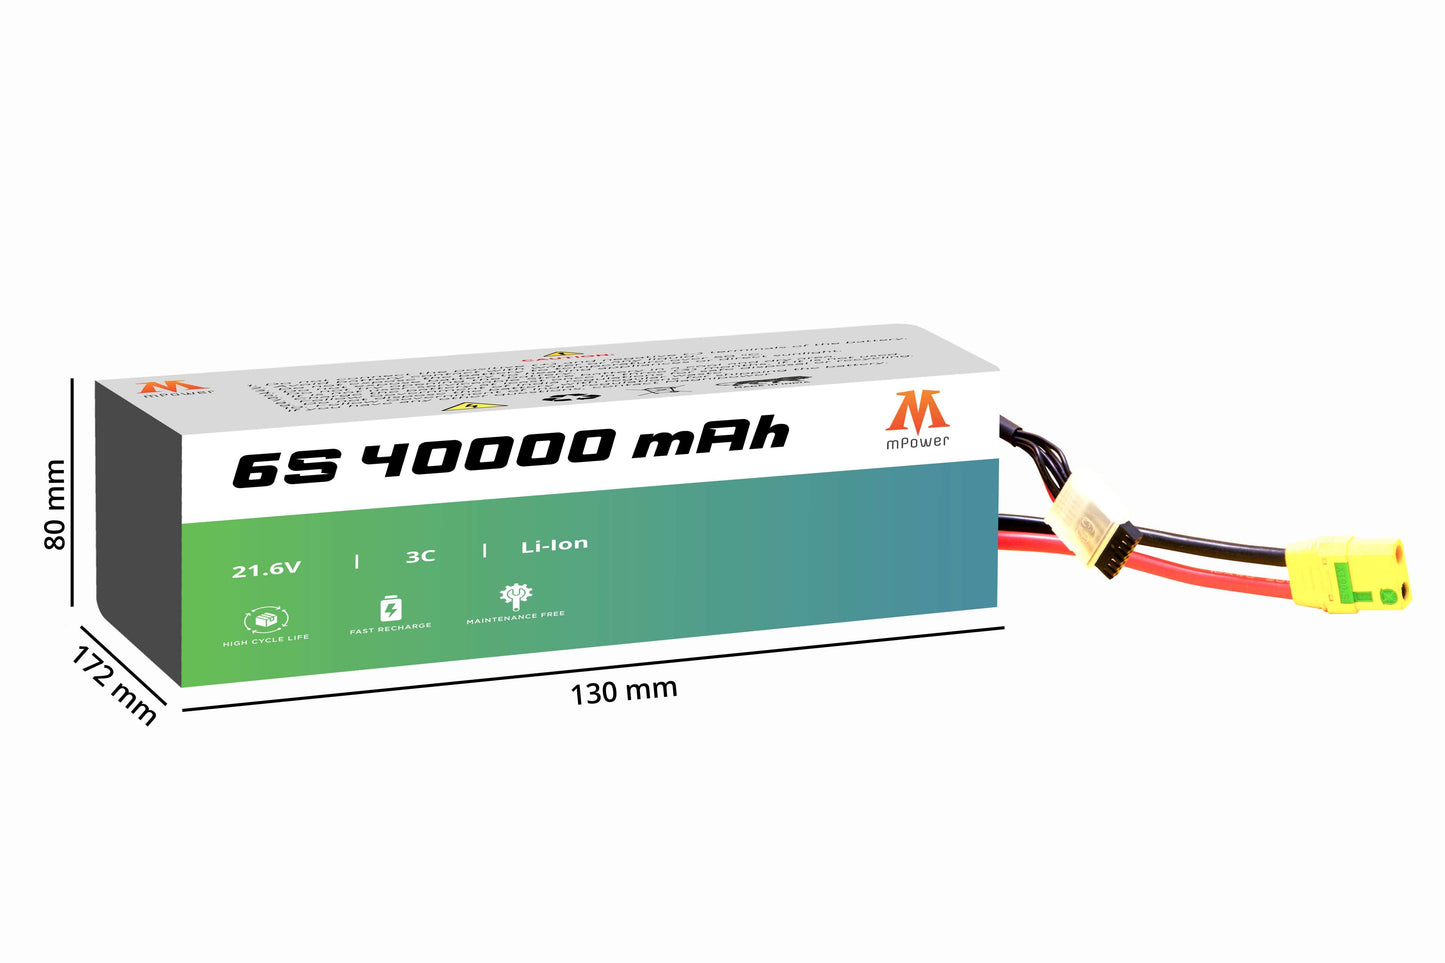 mPower 6S 40000mAh Lithium-Ion Battery for Delivery Drones-mpowerlithium